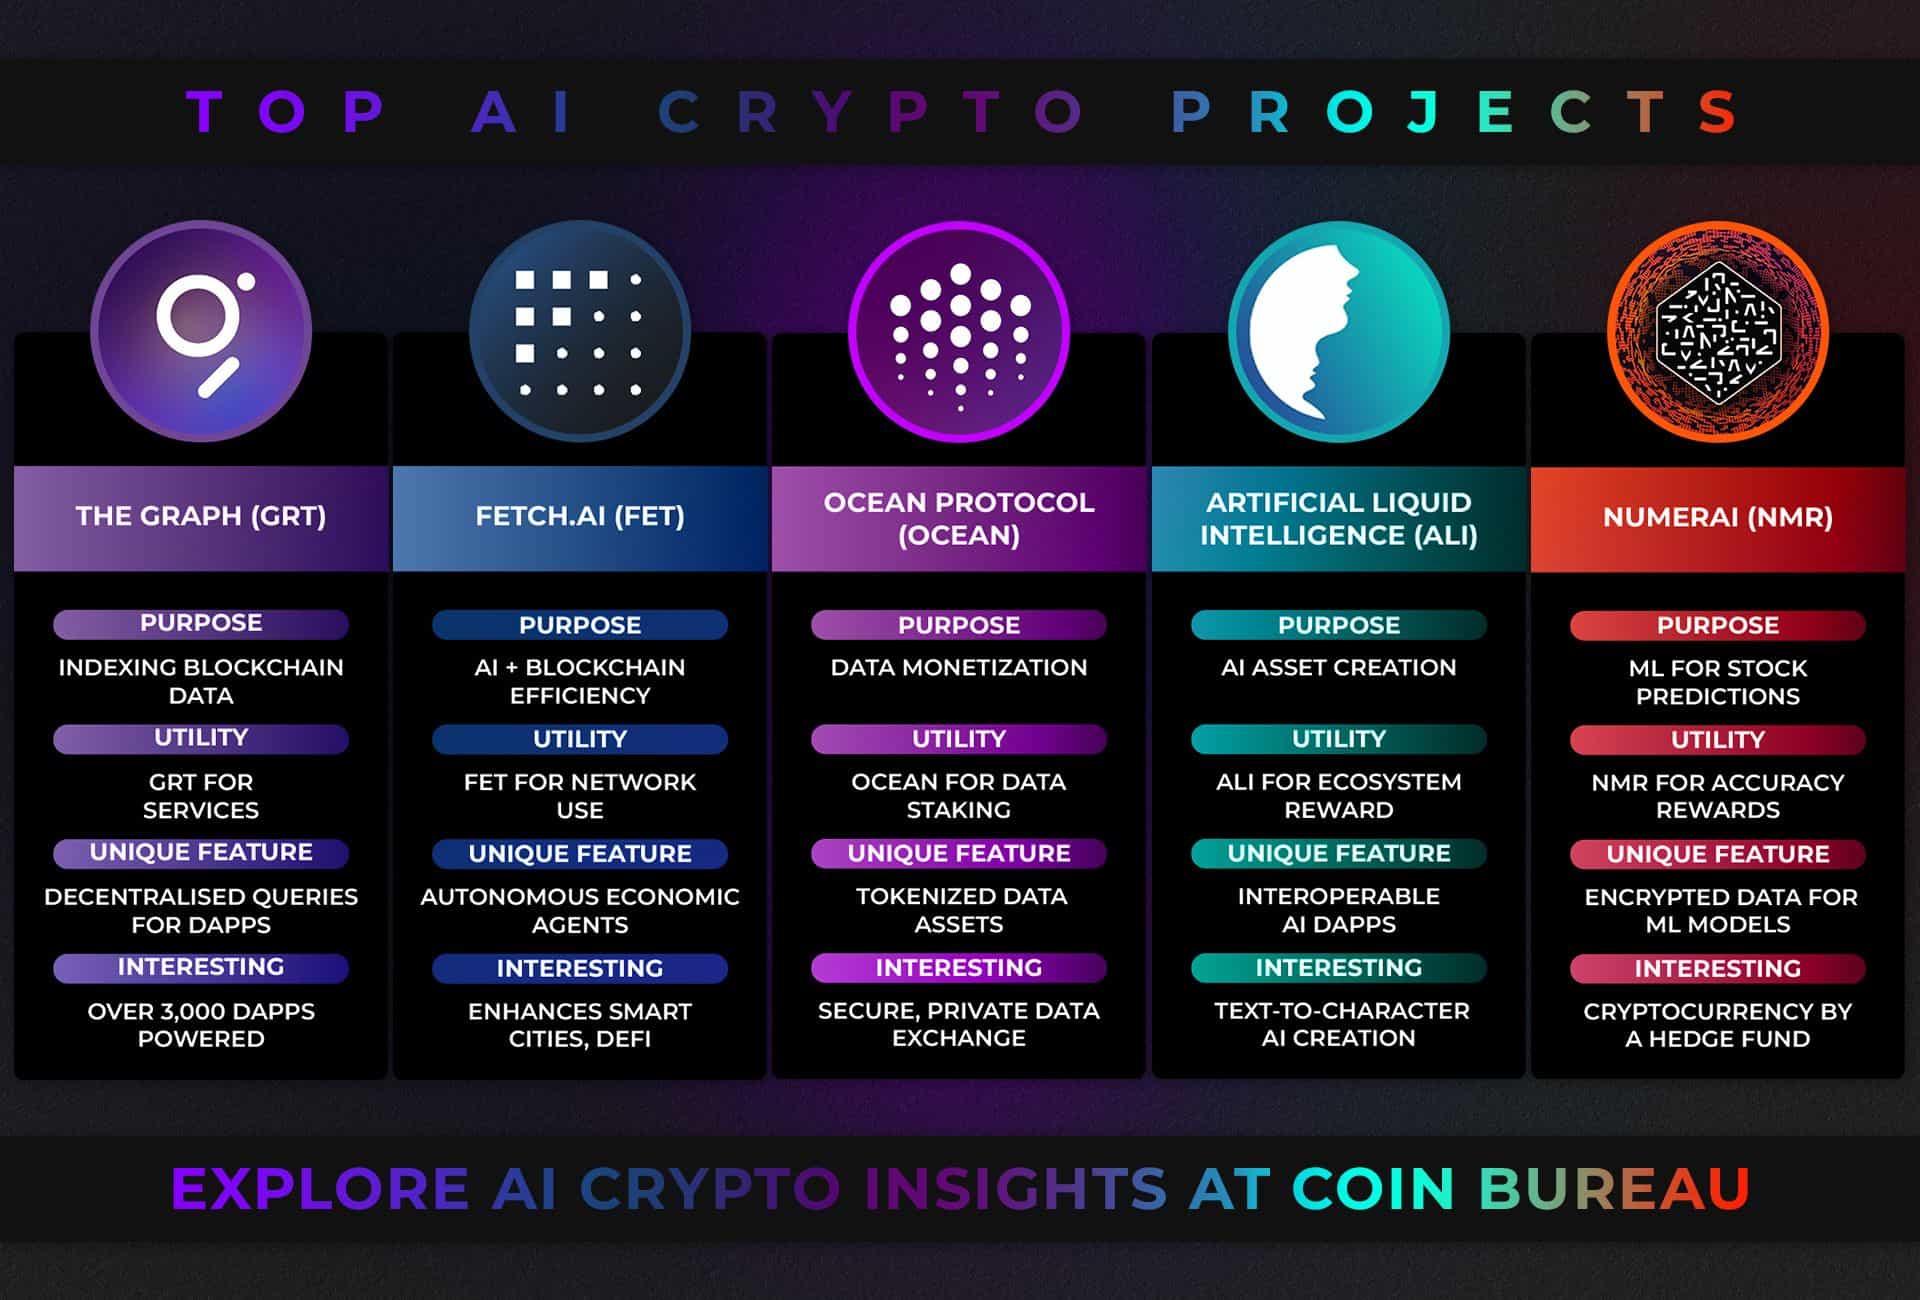 TOP-AI-CRYPTO-PROJECTS (1).jpg